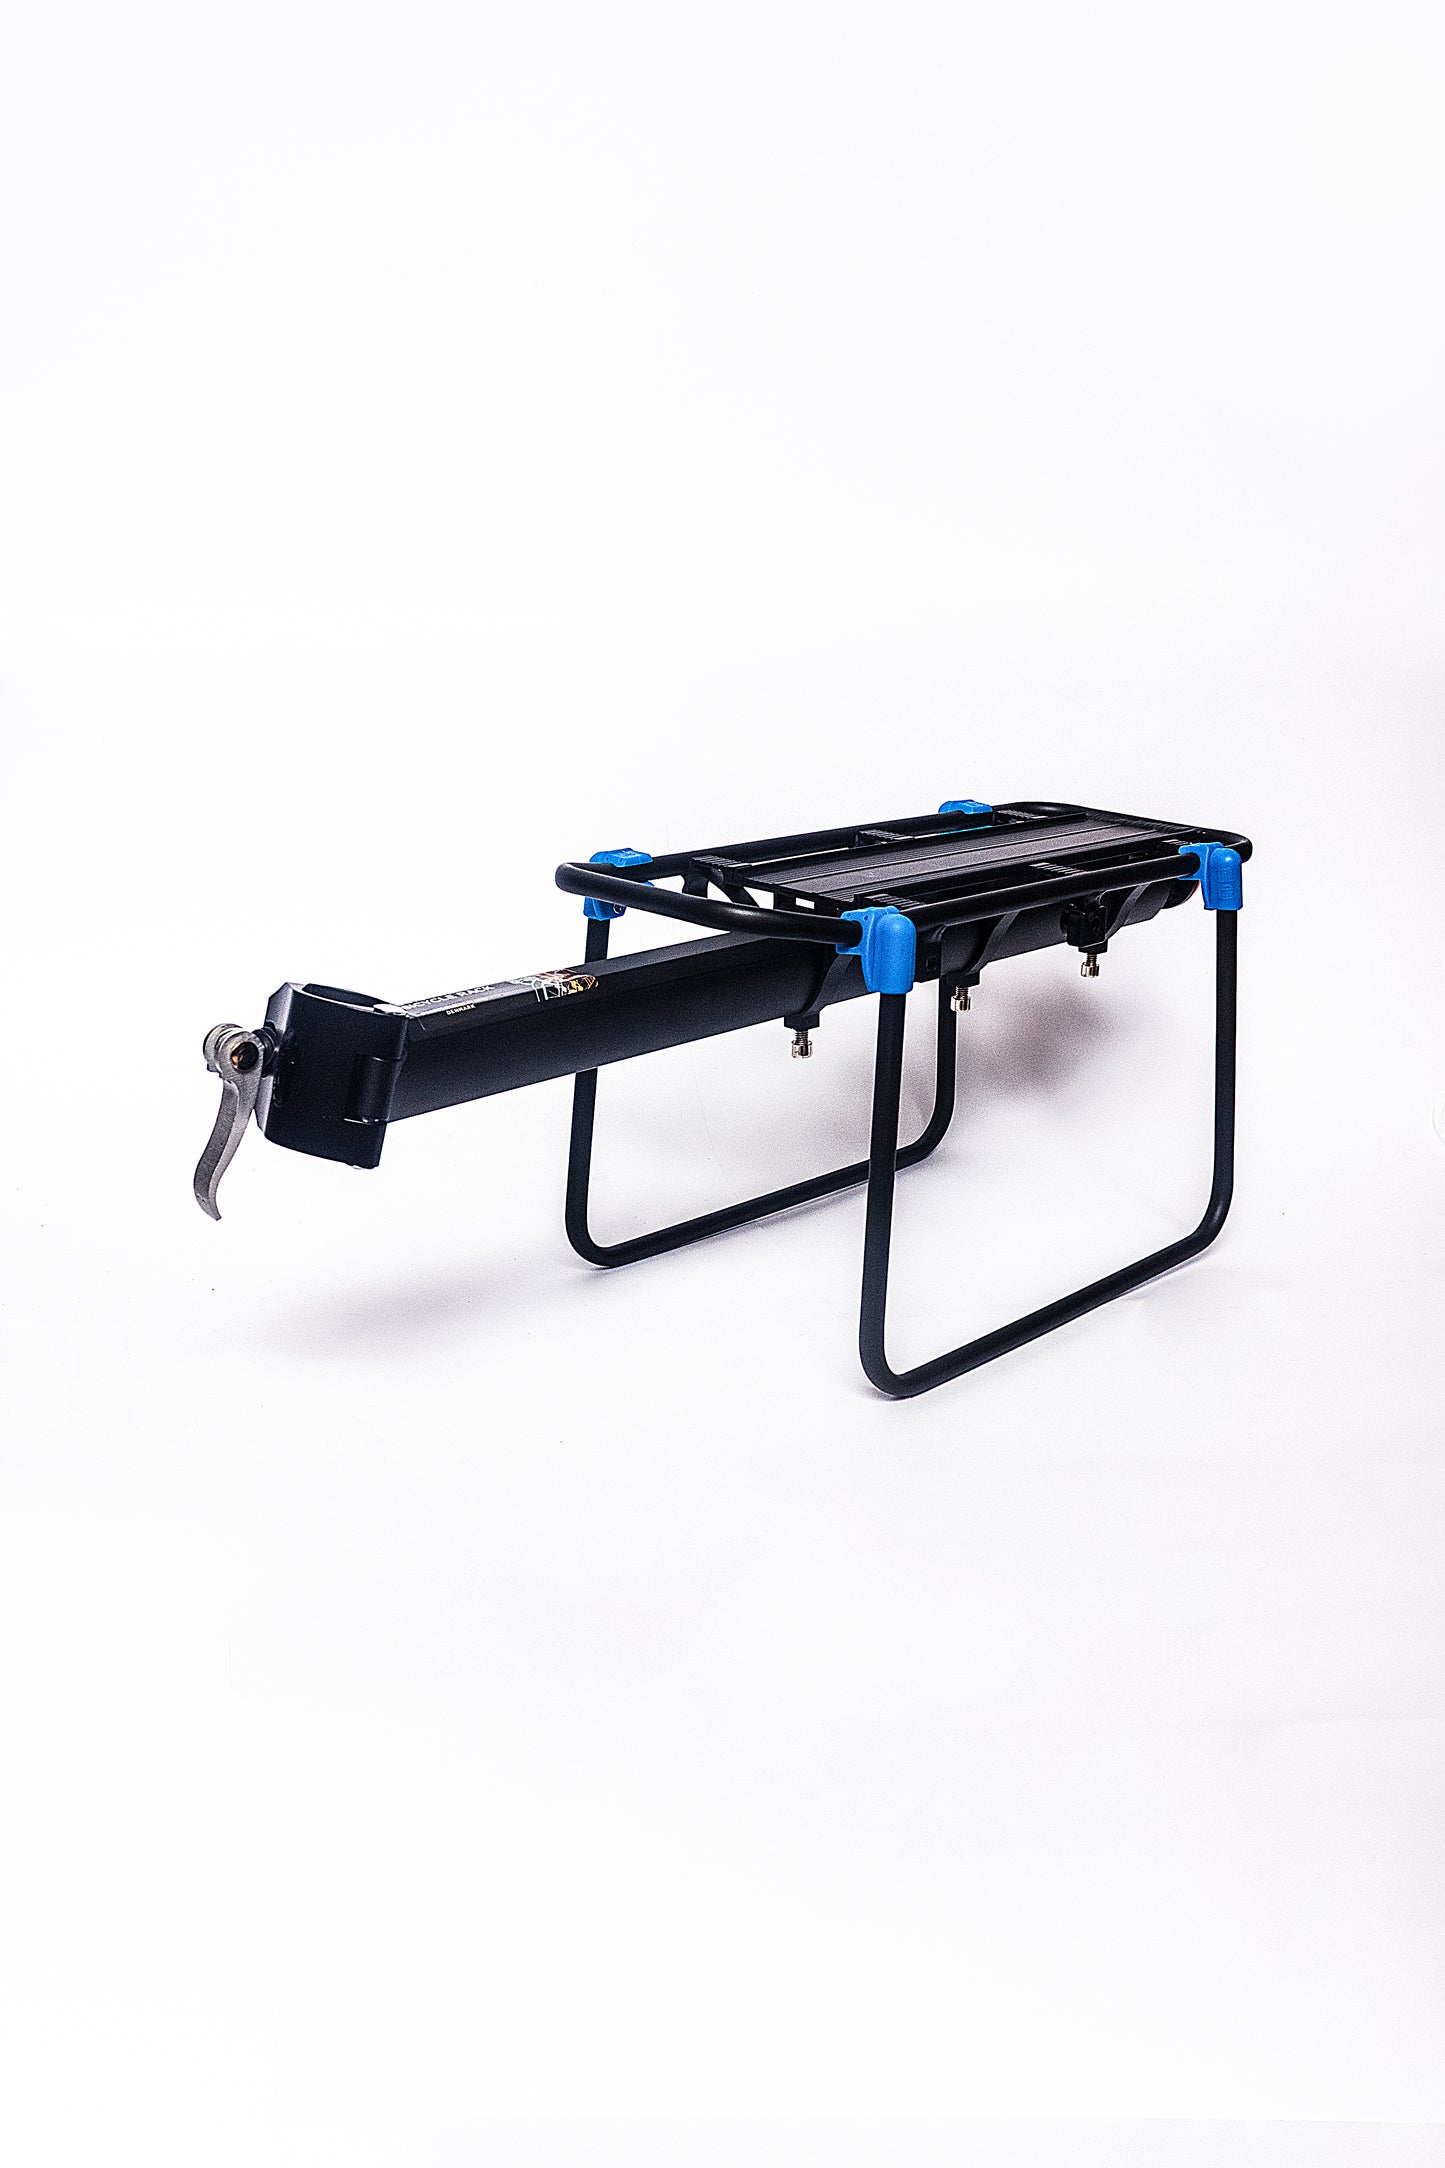 Norregade Bike Shelf with Reflective Tail Attachment